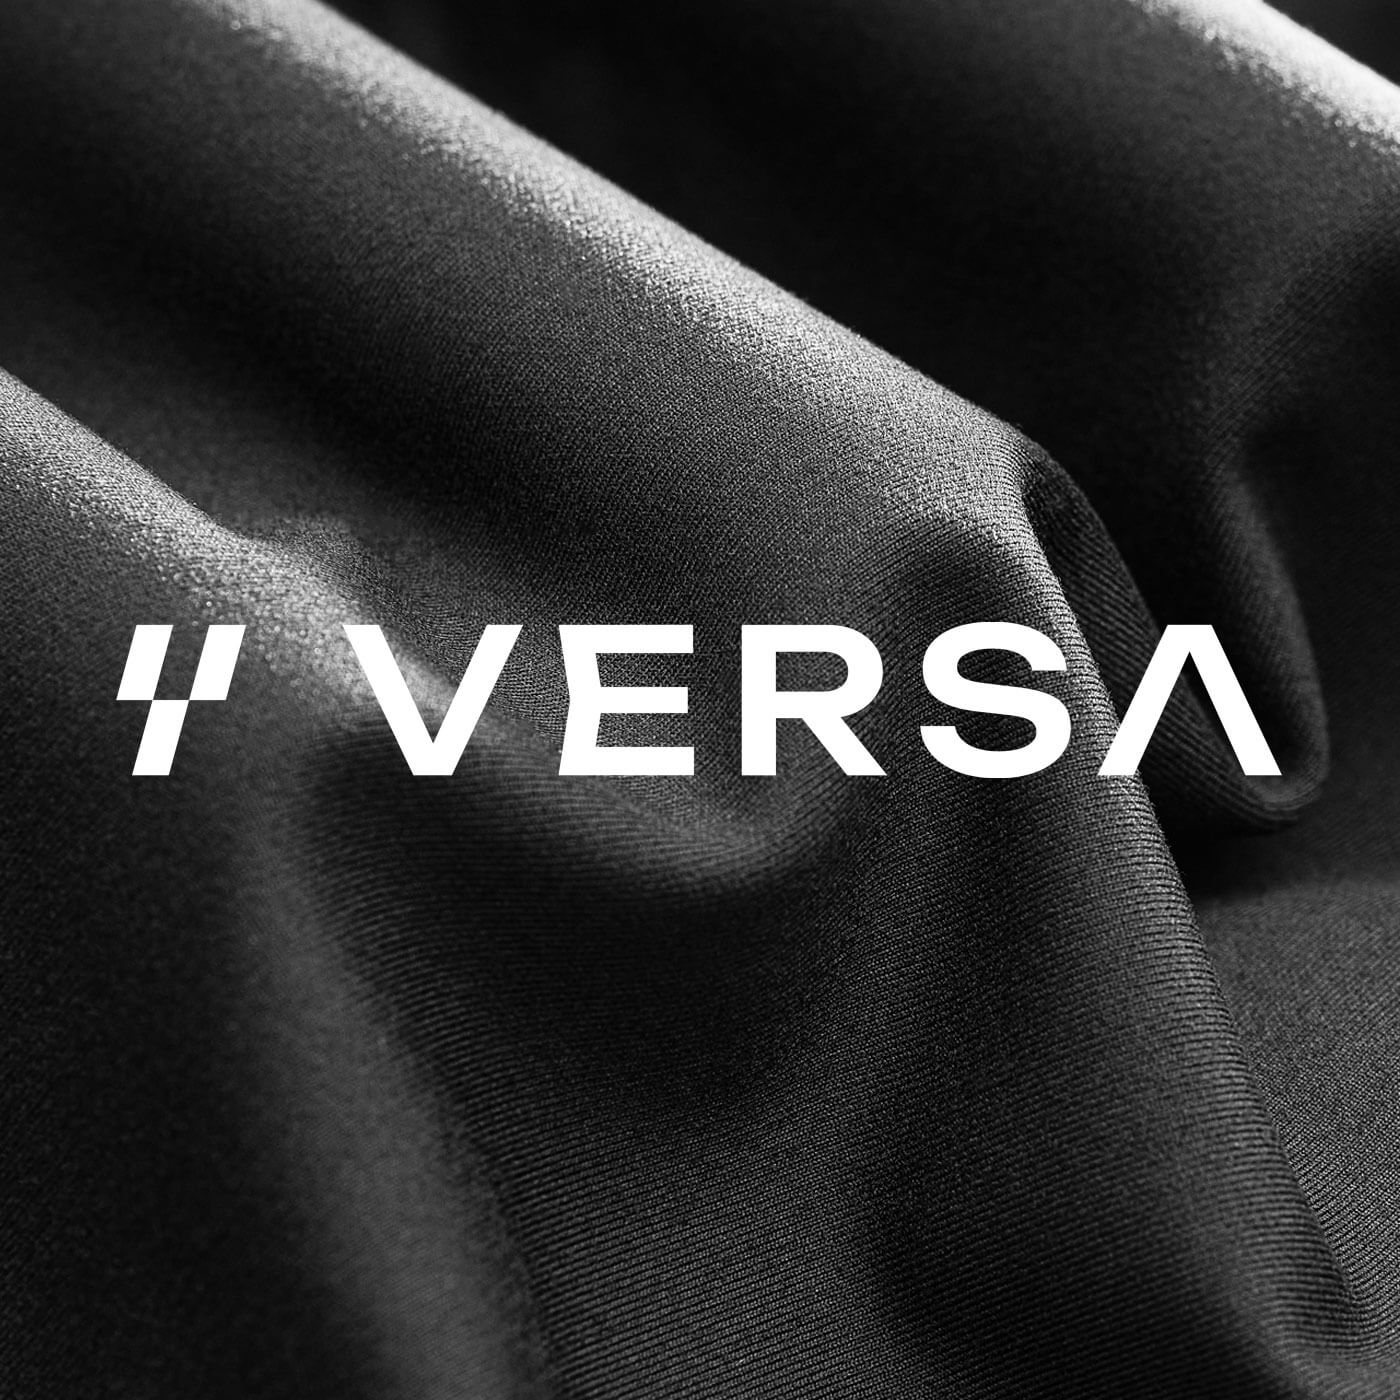 BlackStrap VERSA Fabric is a dual-knit that is featured on Baselayers.